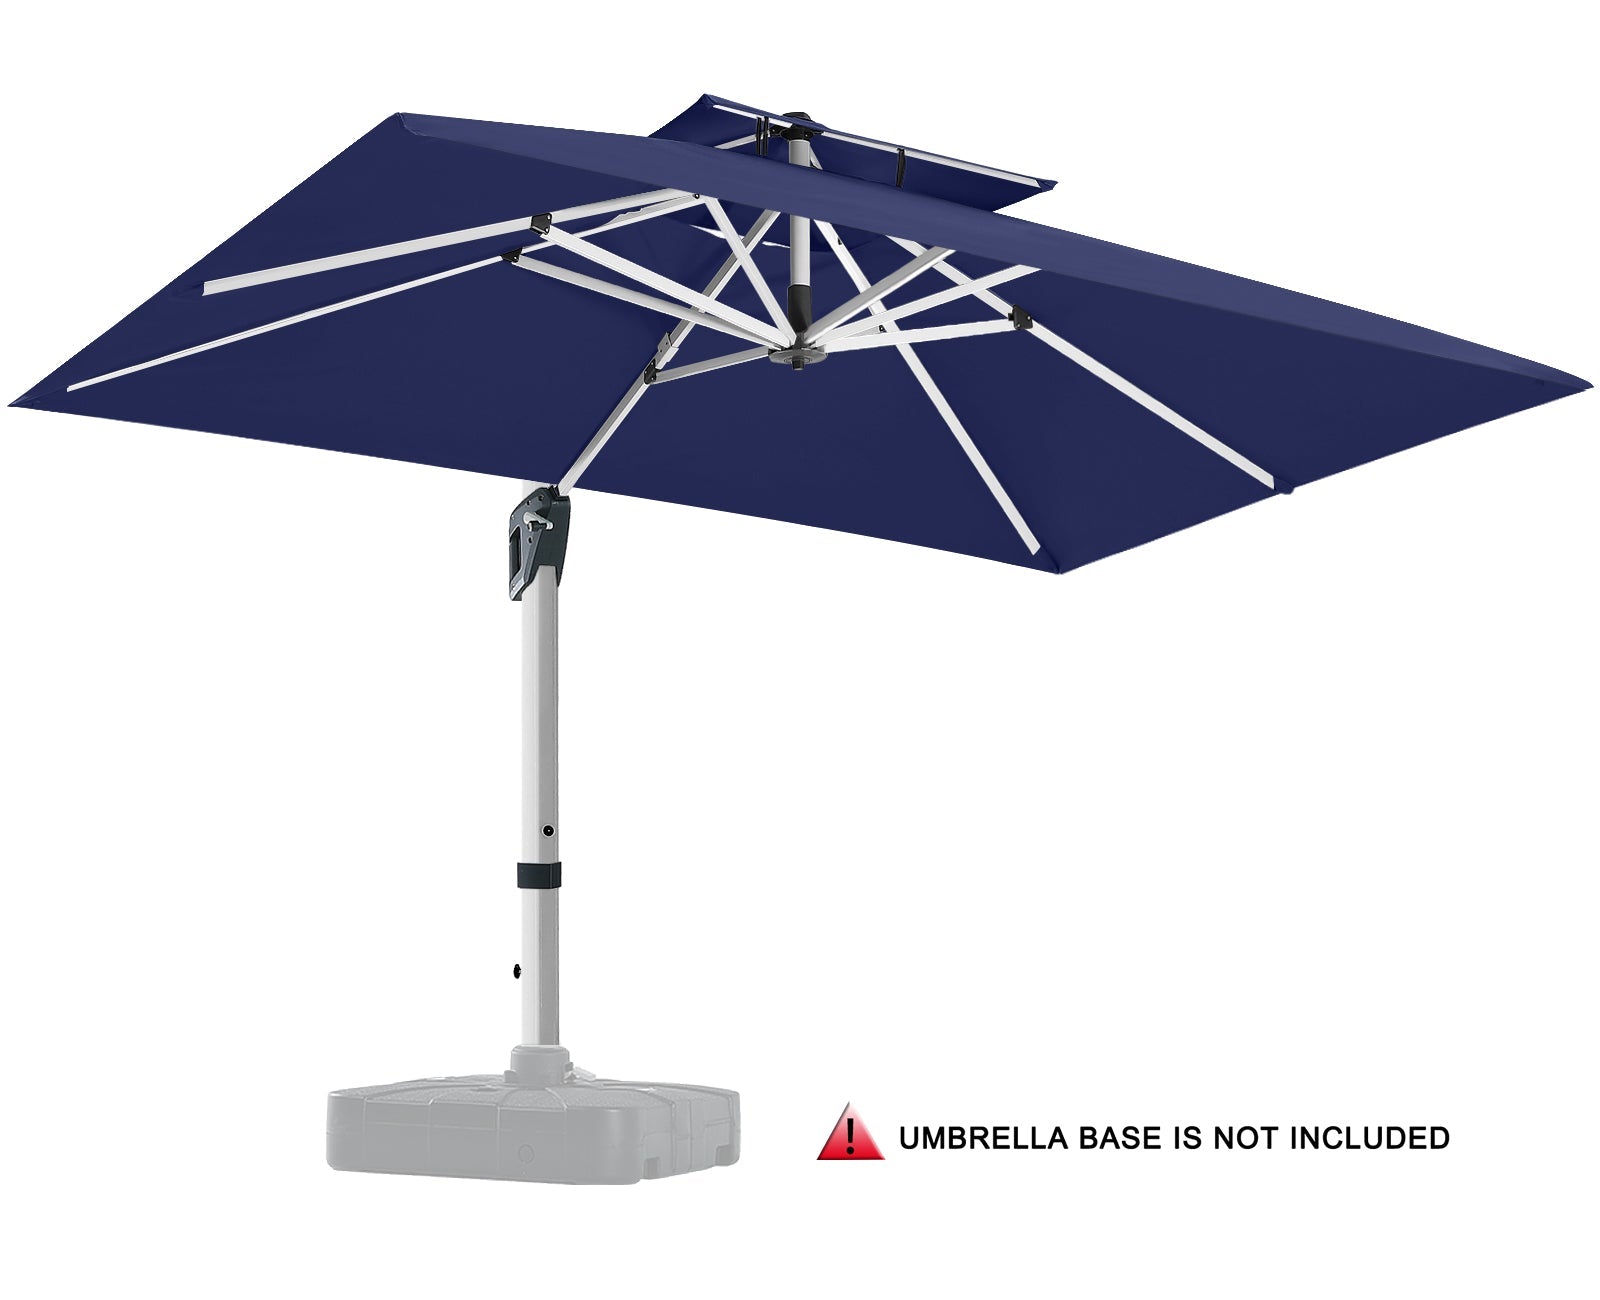 10x13 Cantilever Patio Umbrella Double Top with 360° Rotation